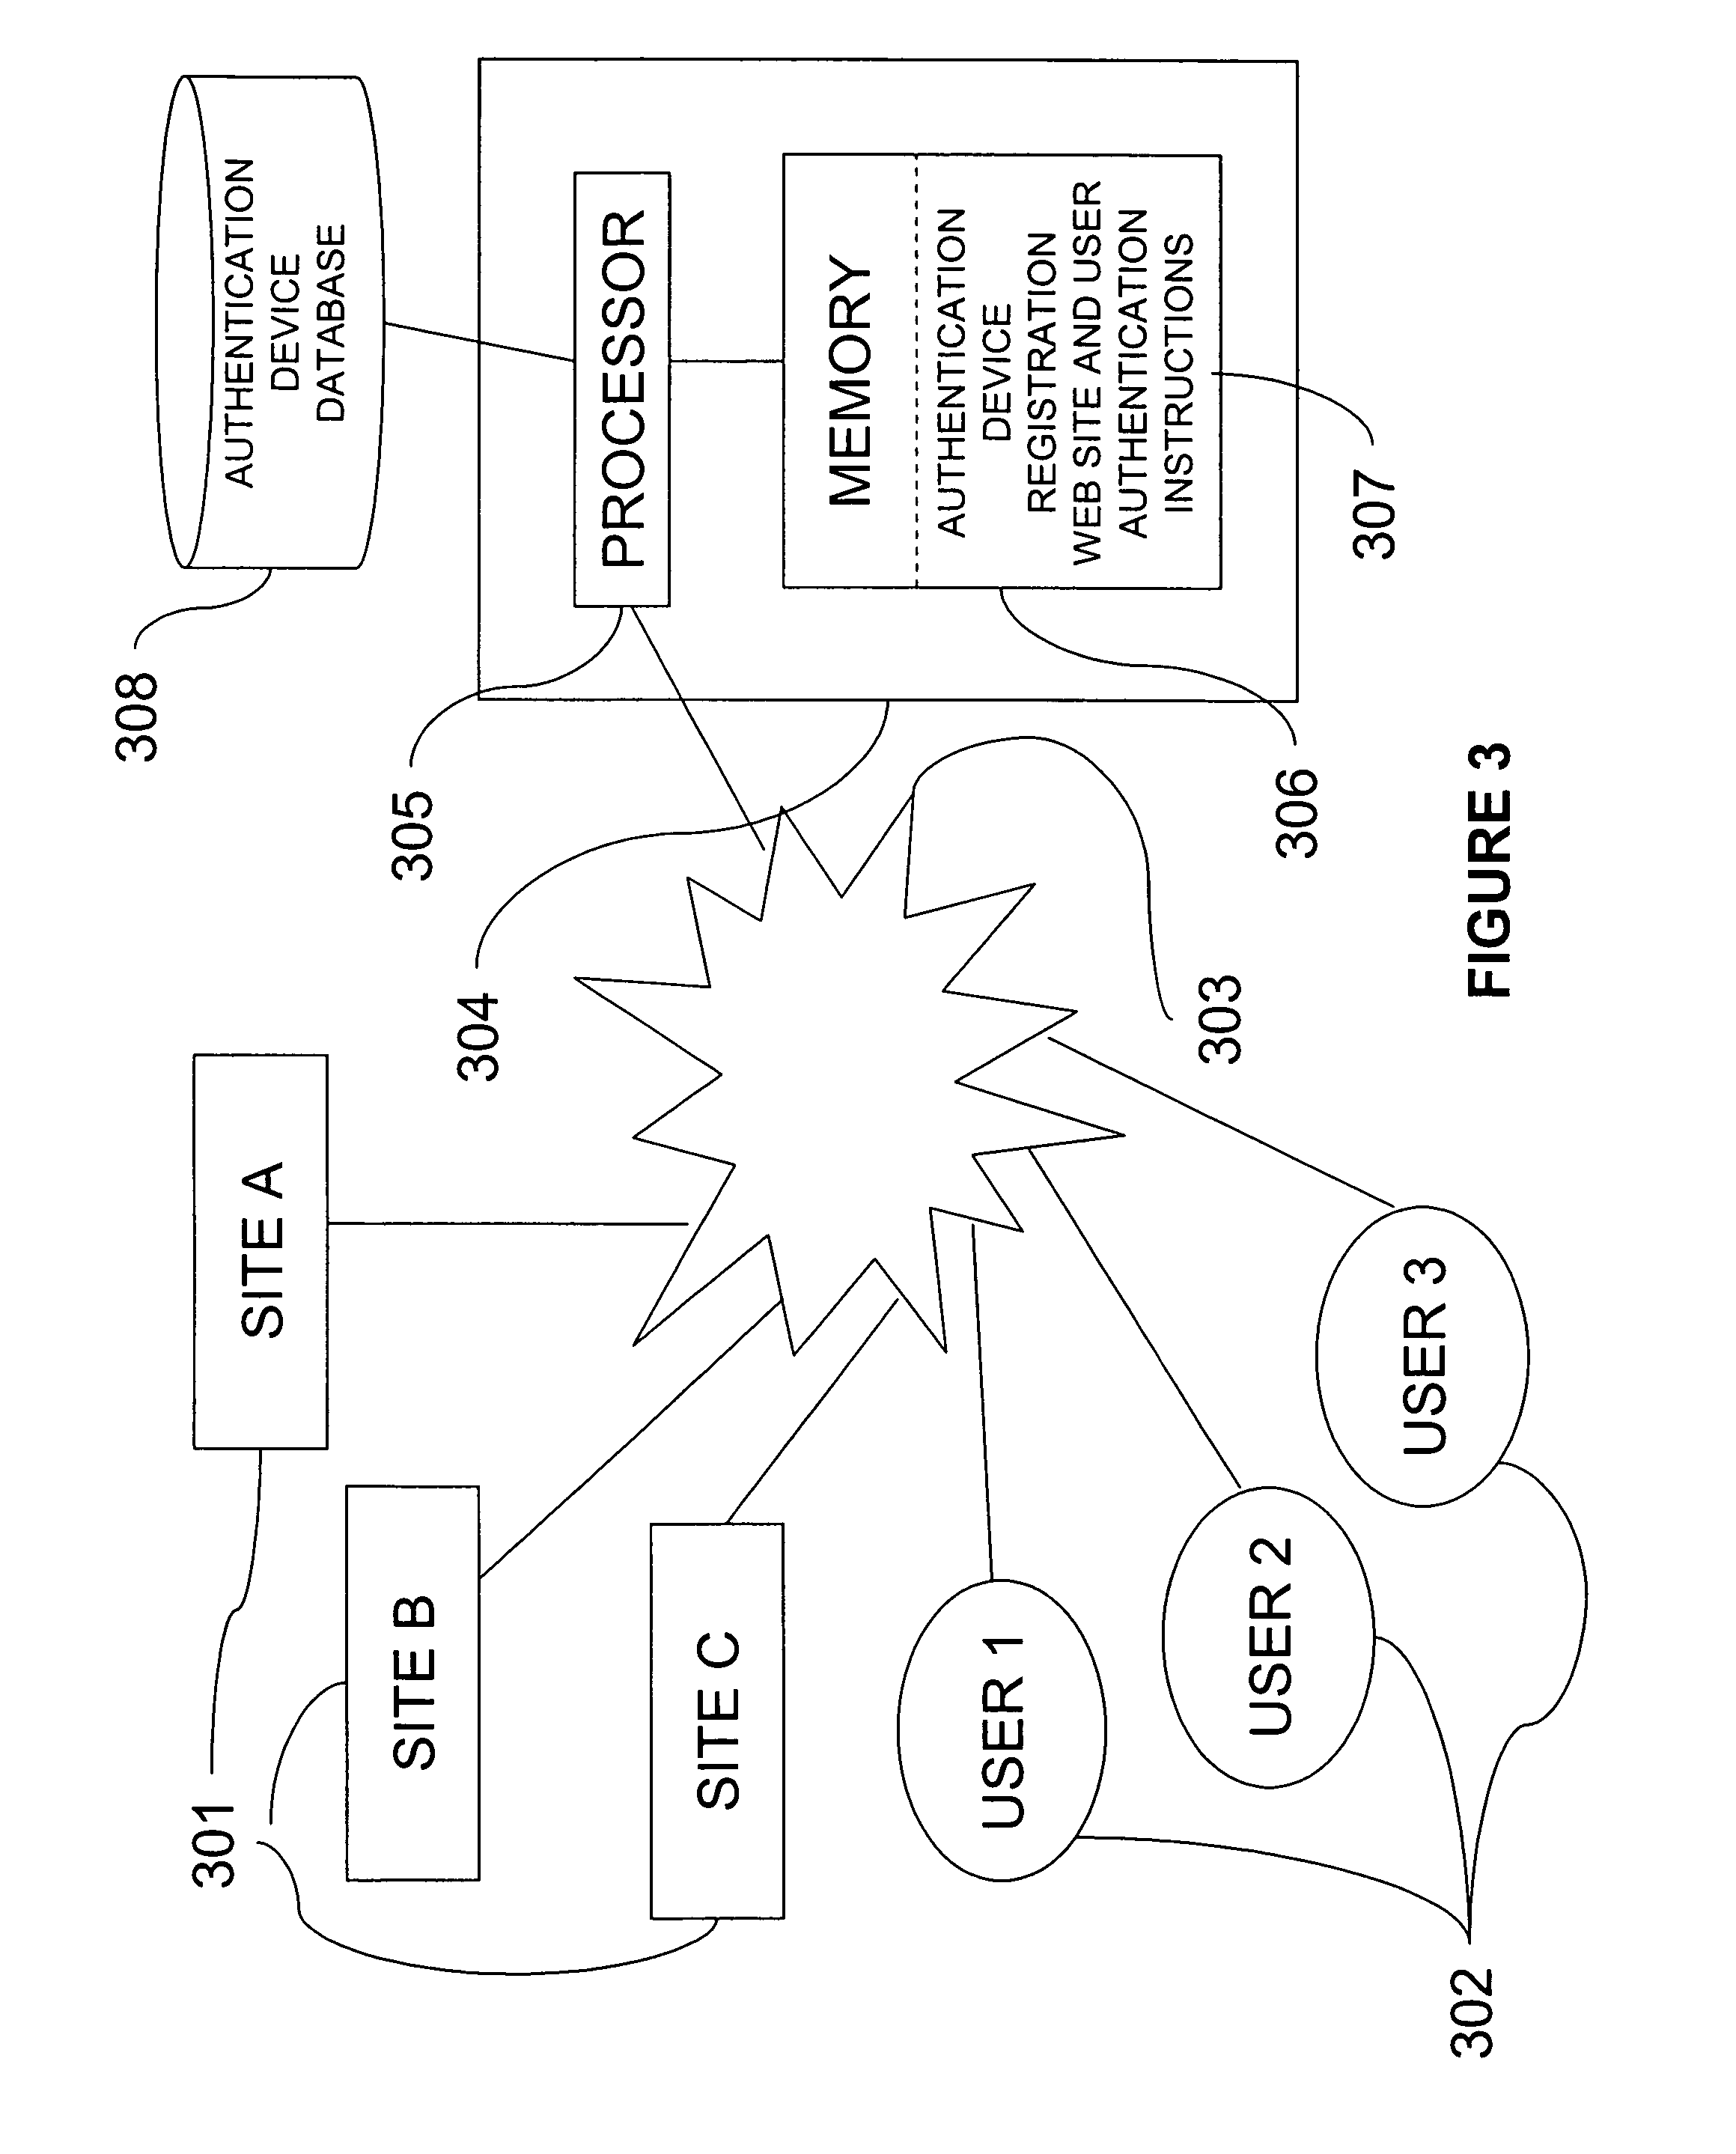 System and method for website authentication using a shared secret